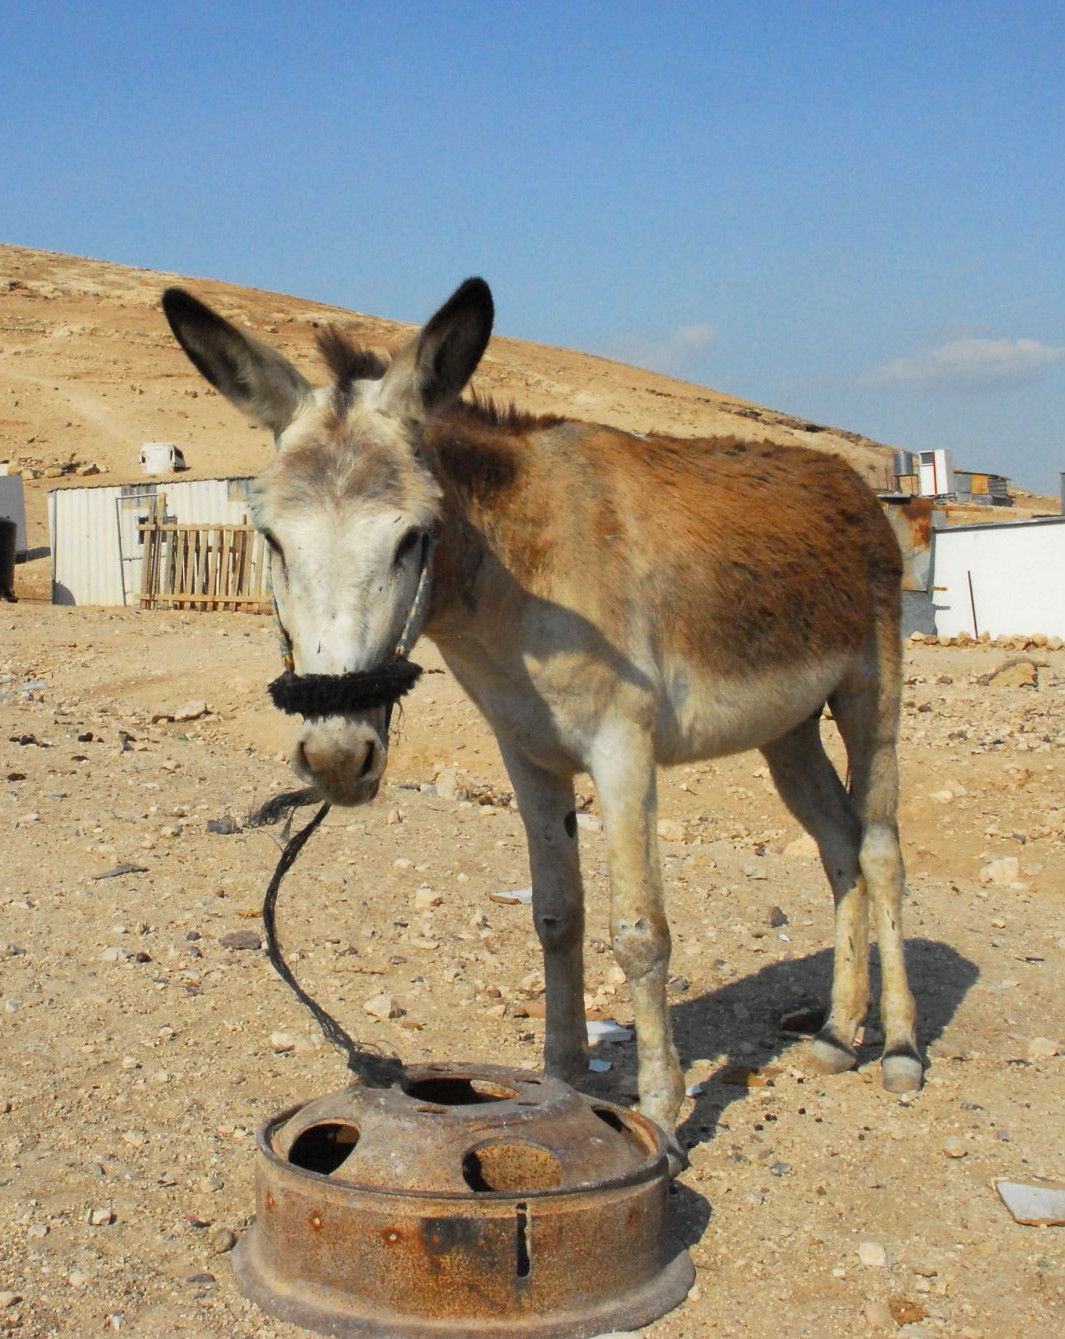 Our member society PWLS run clinics and HBC workshops to improve animal welfare for working equines in Palestine. Pictured: a donkey in one of the Bedouin communities.